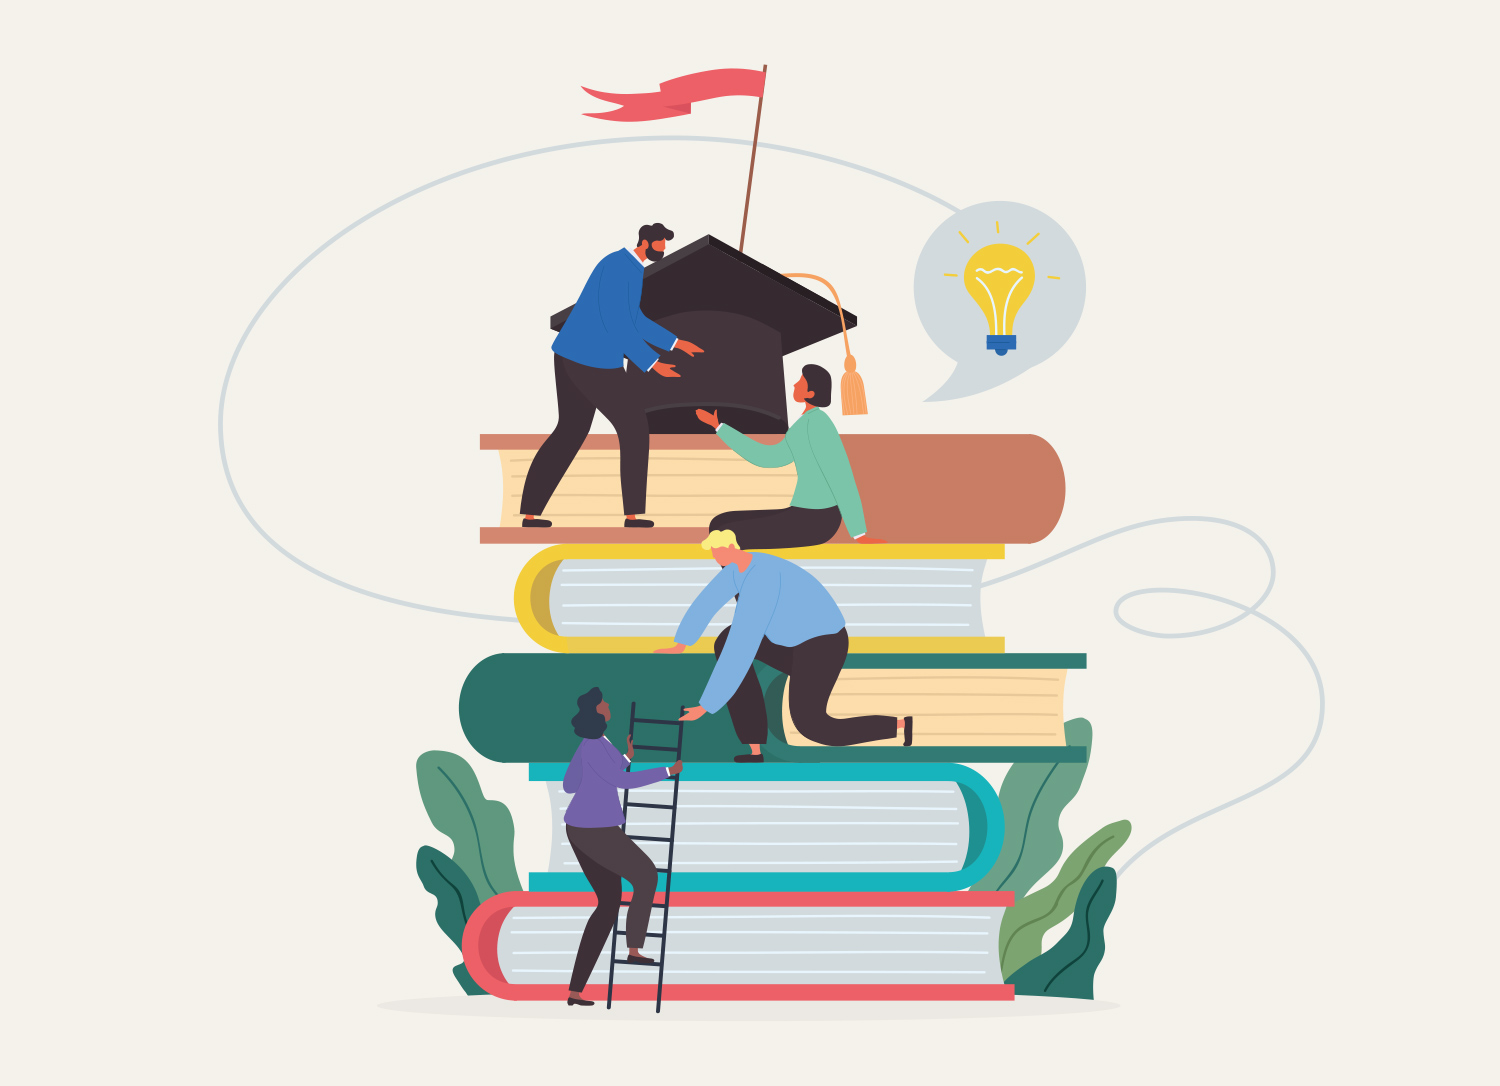 minimalist illustration of four figure helping each other climb large books to reach the graduation cap at the top of the book stack